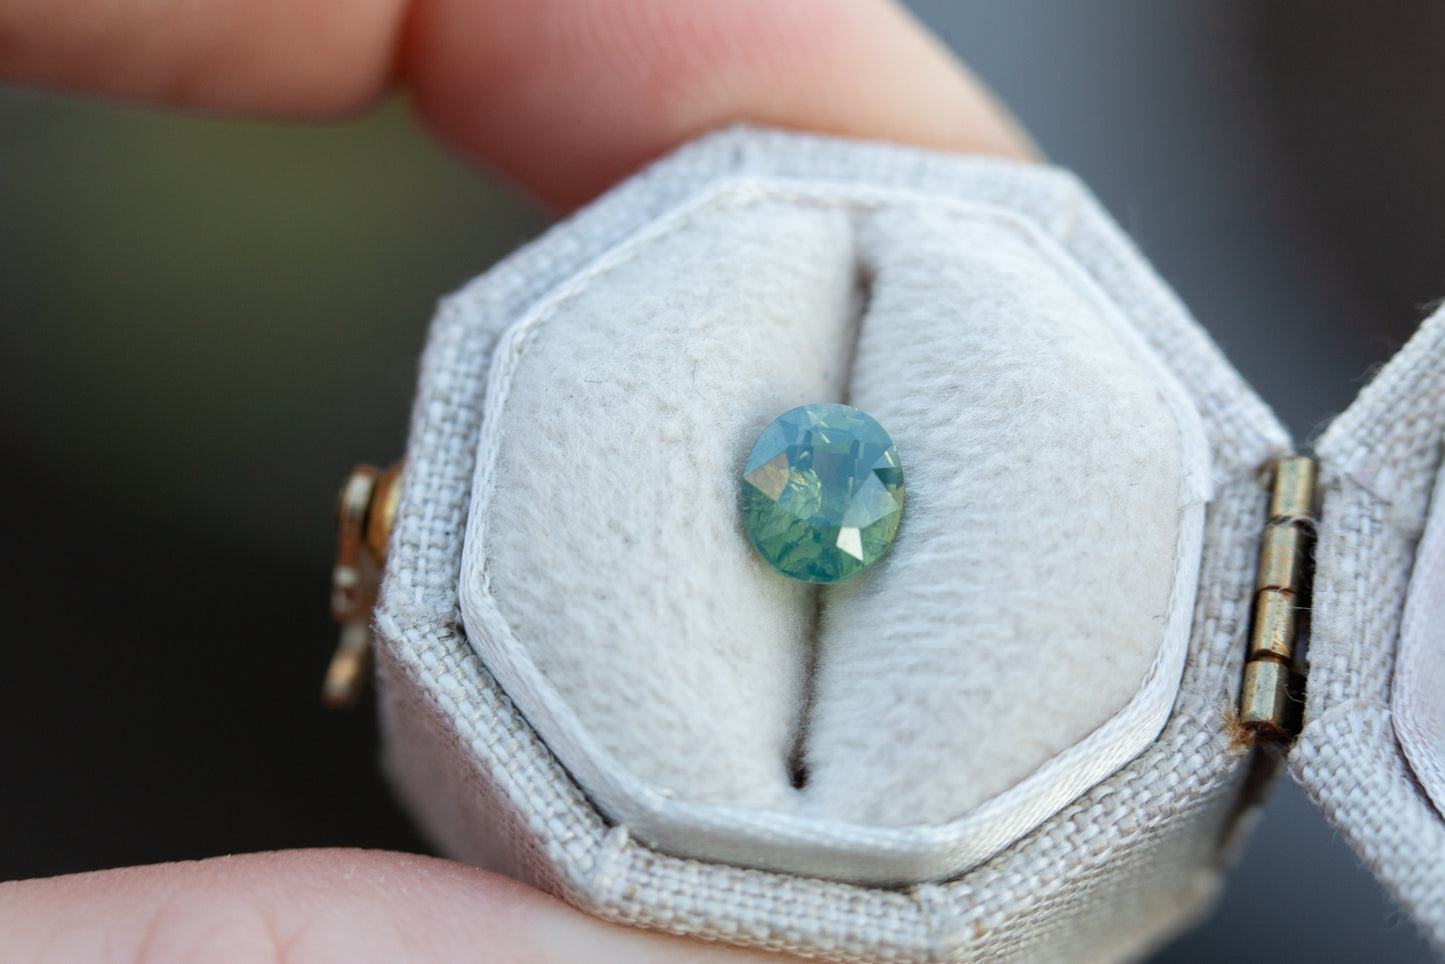 Load image into Gallery viewer, 1.14ct oval opalescent teal green sapphire
